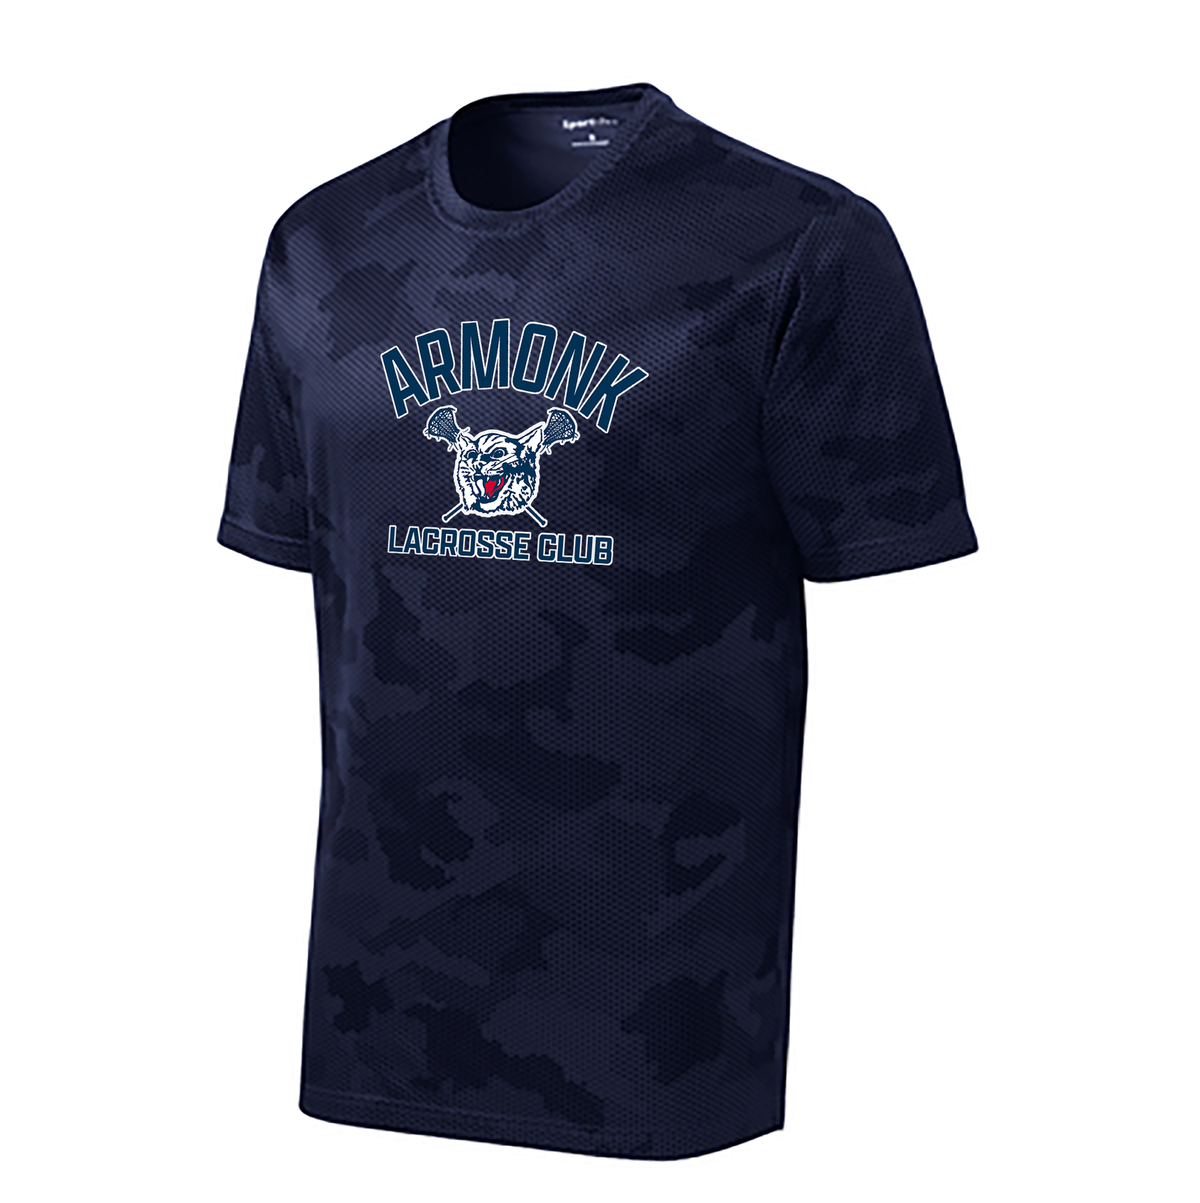 Armonk Lacrosse Club CamoHex Tee (Youth & Adult)